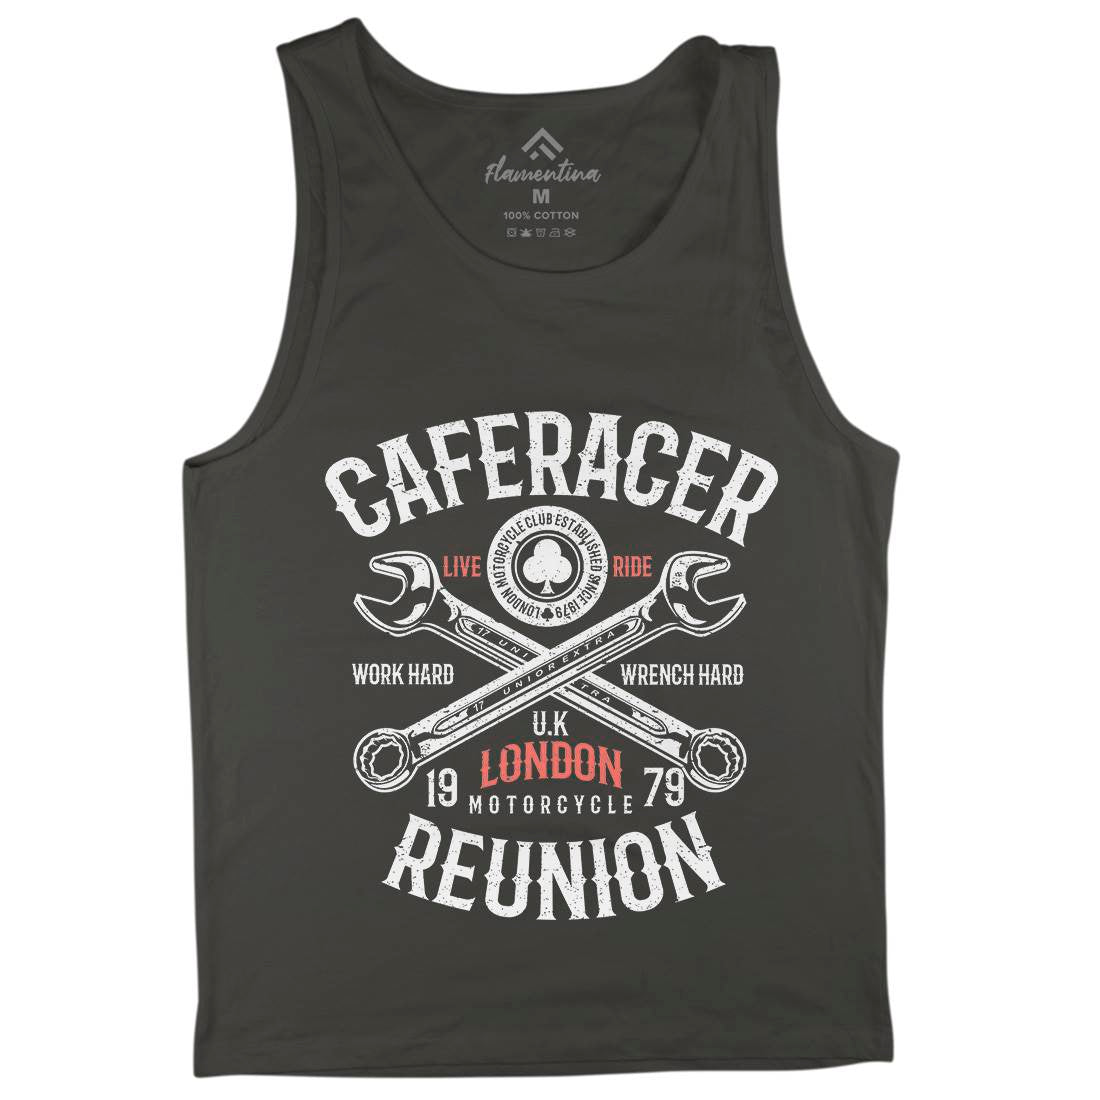 Caferacer Reunion Mens Tank Top Vest Motorcycles A025